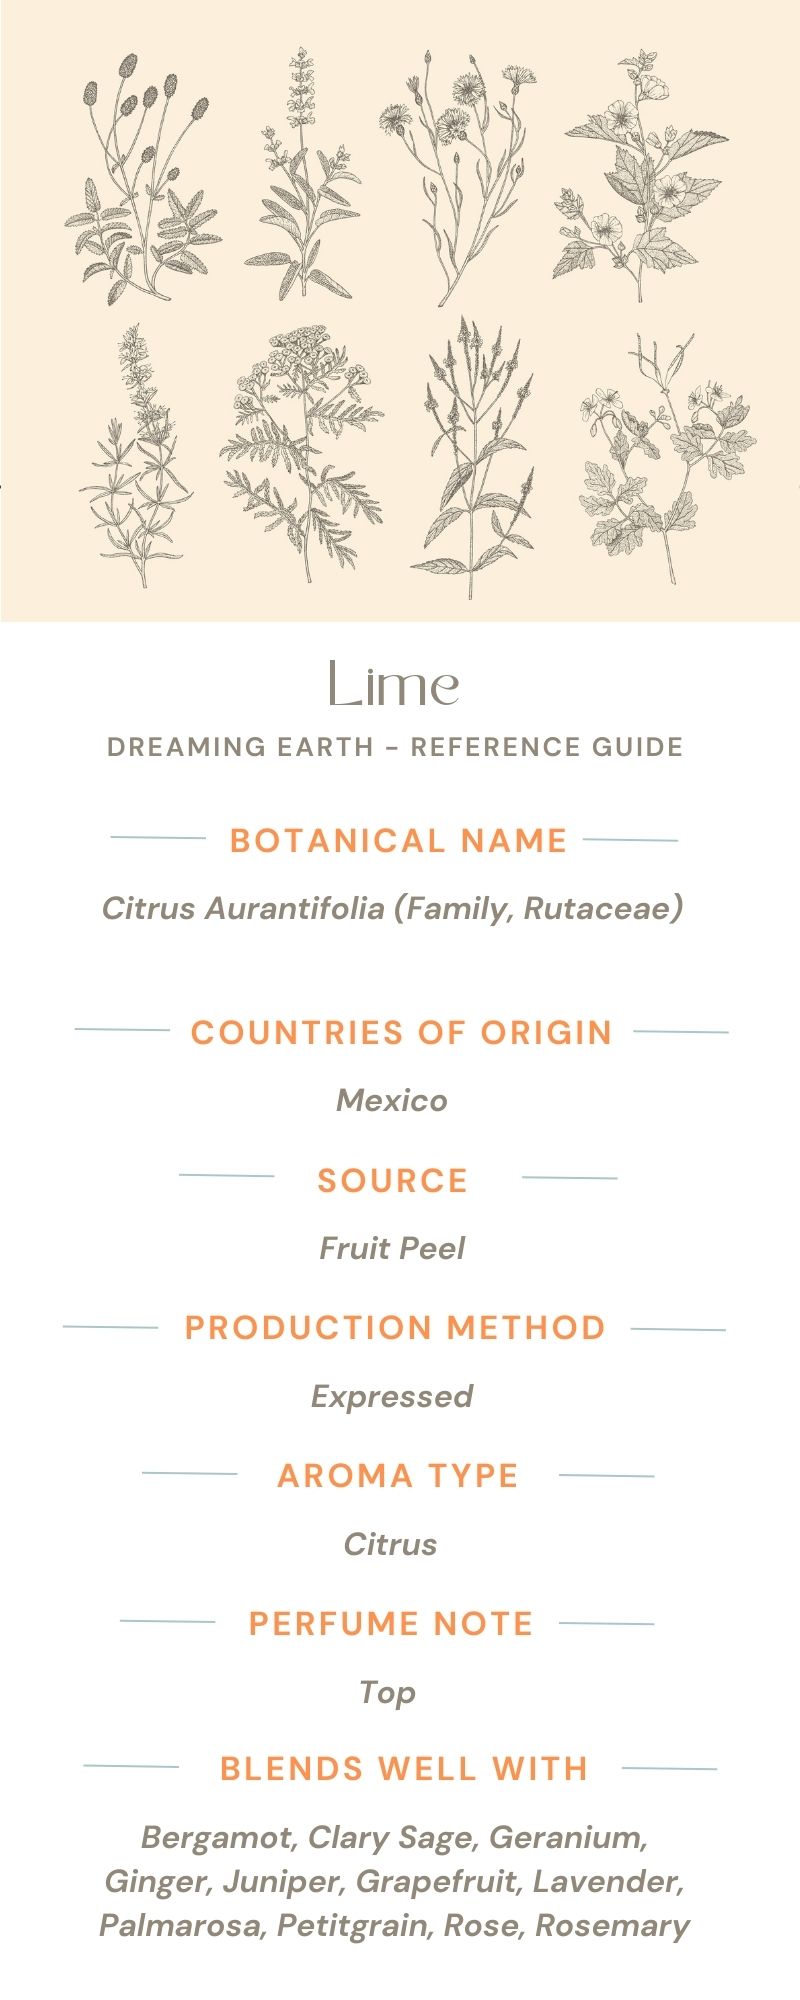 Load image into Gallery viewer, Lime Essential Oil - Dreaming Earth Inc
